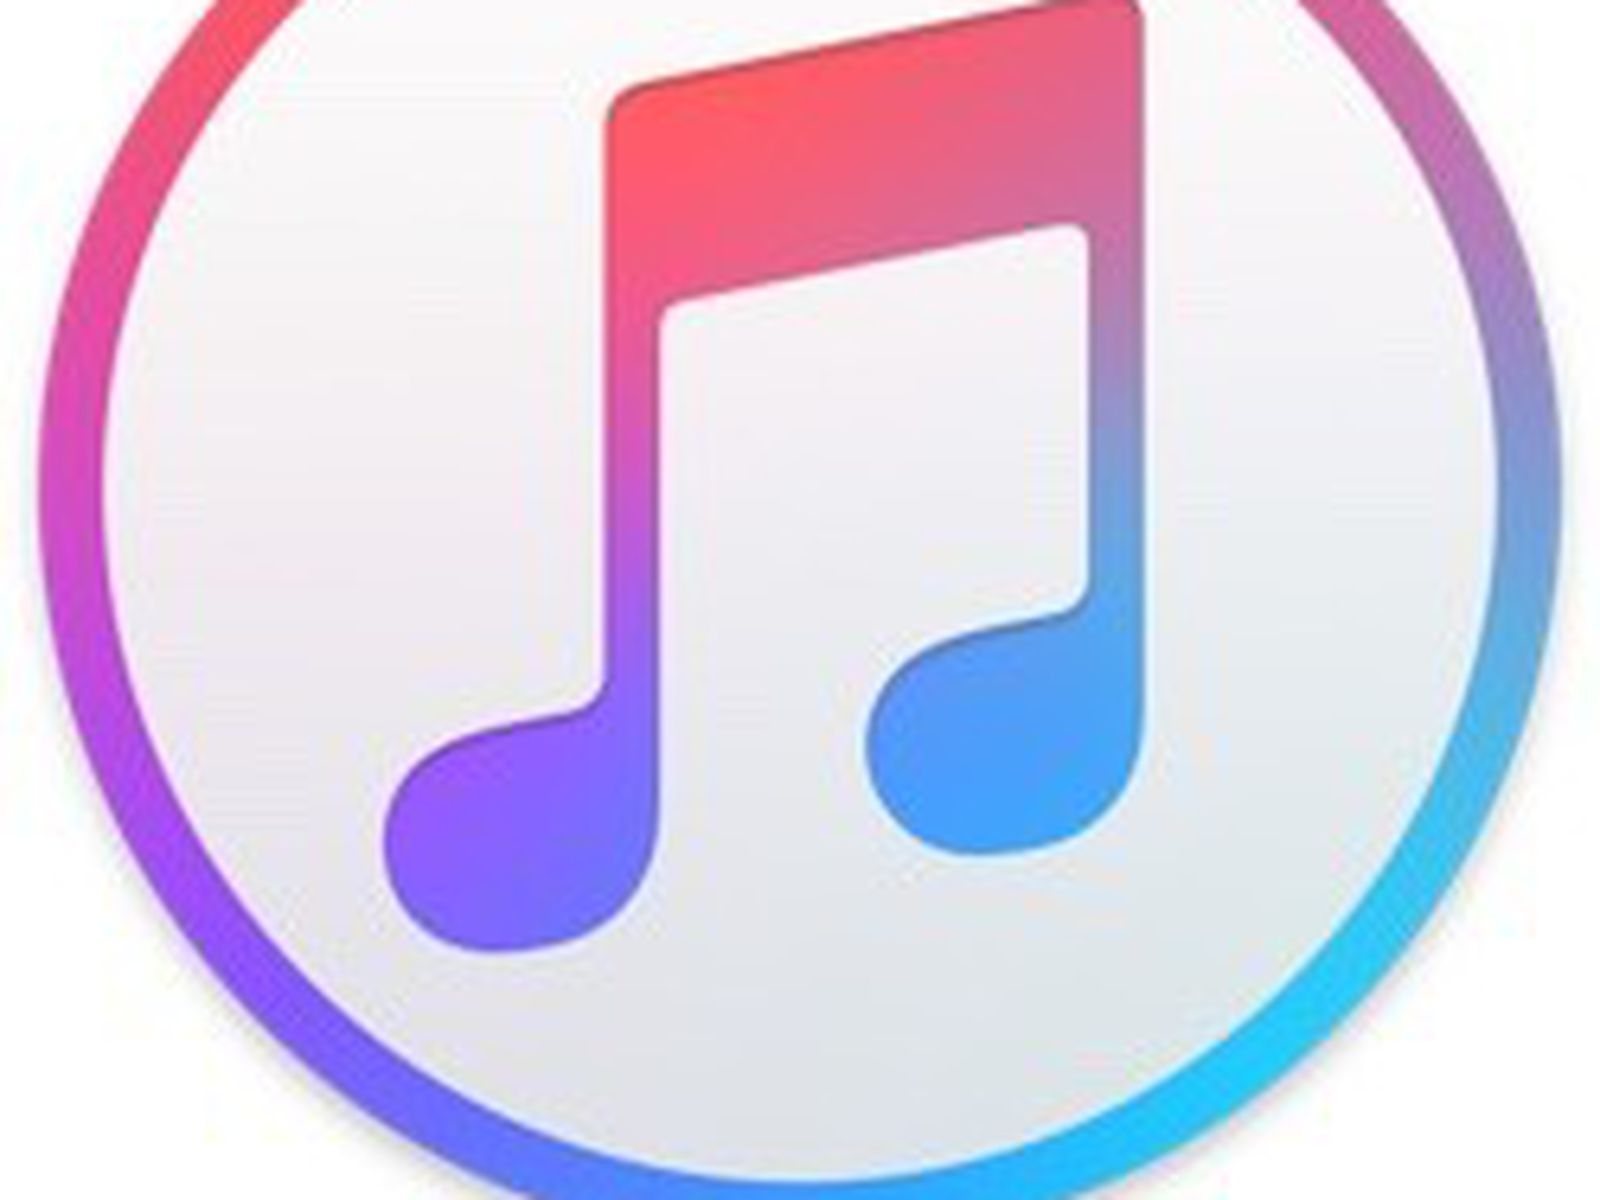 itunes 12.5.1 review